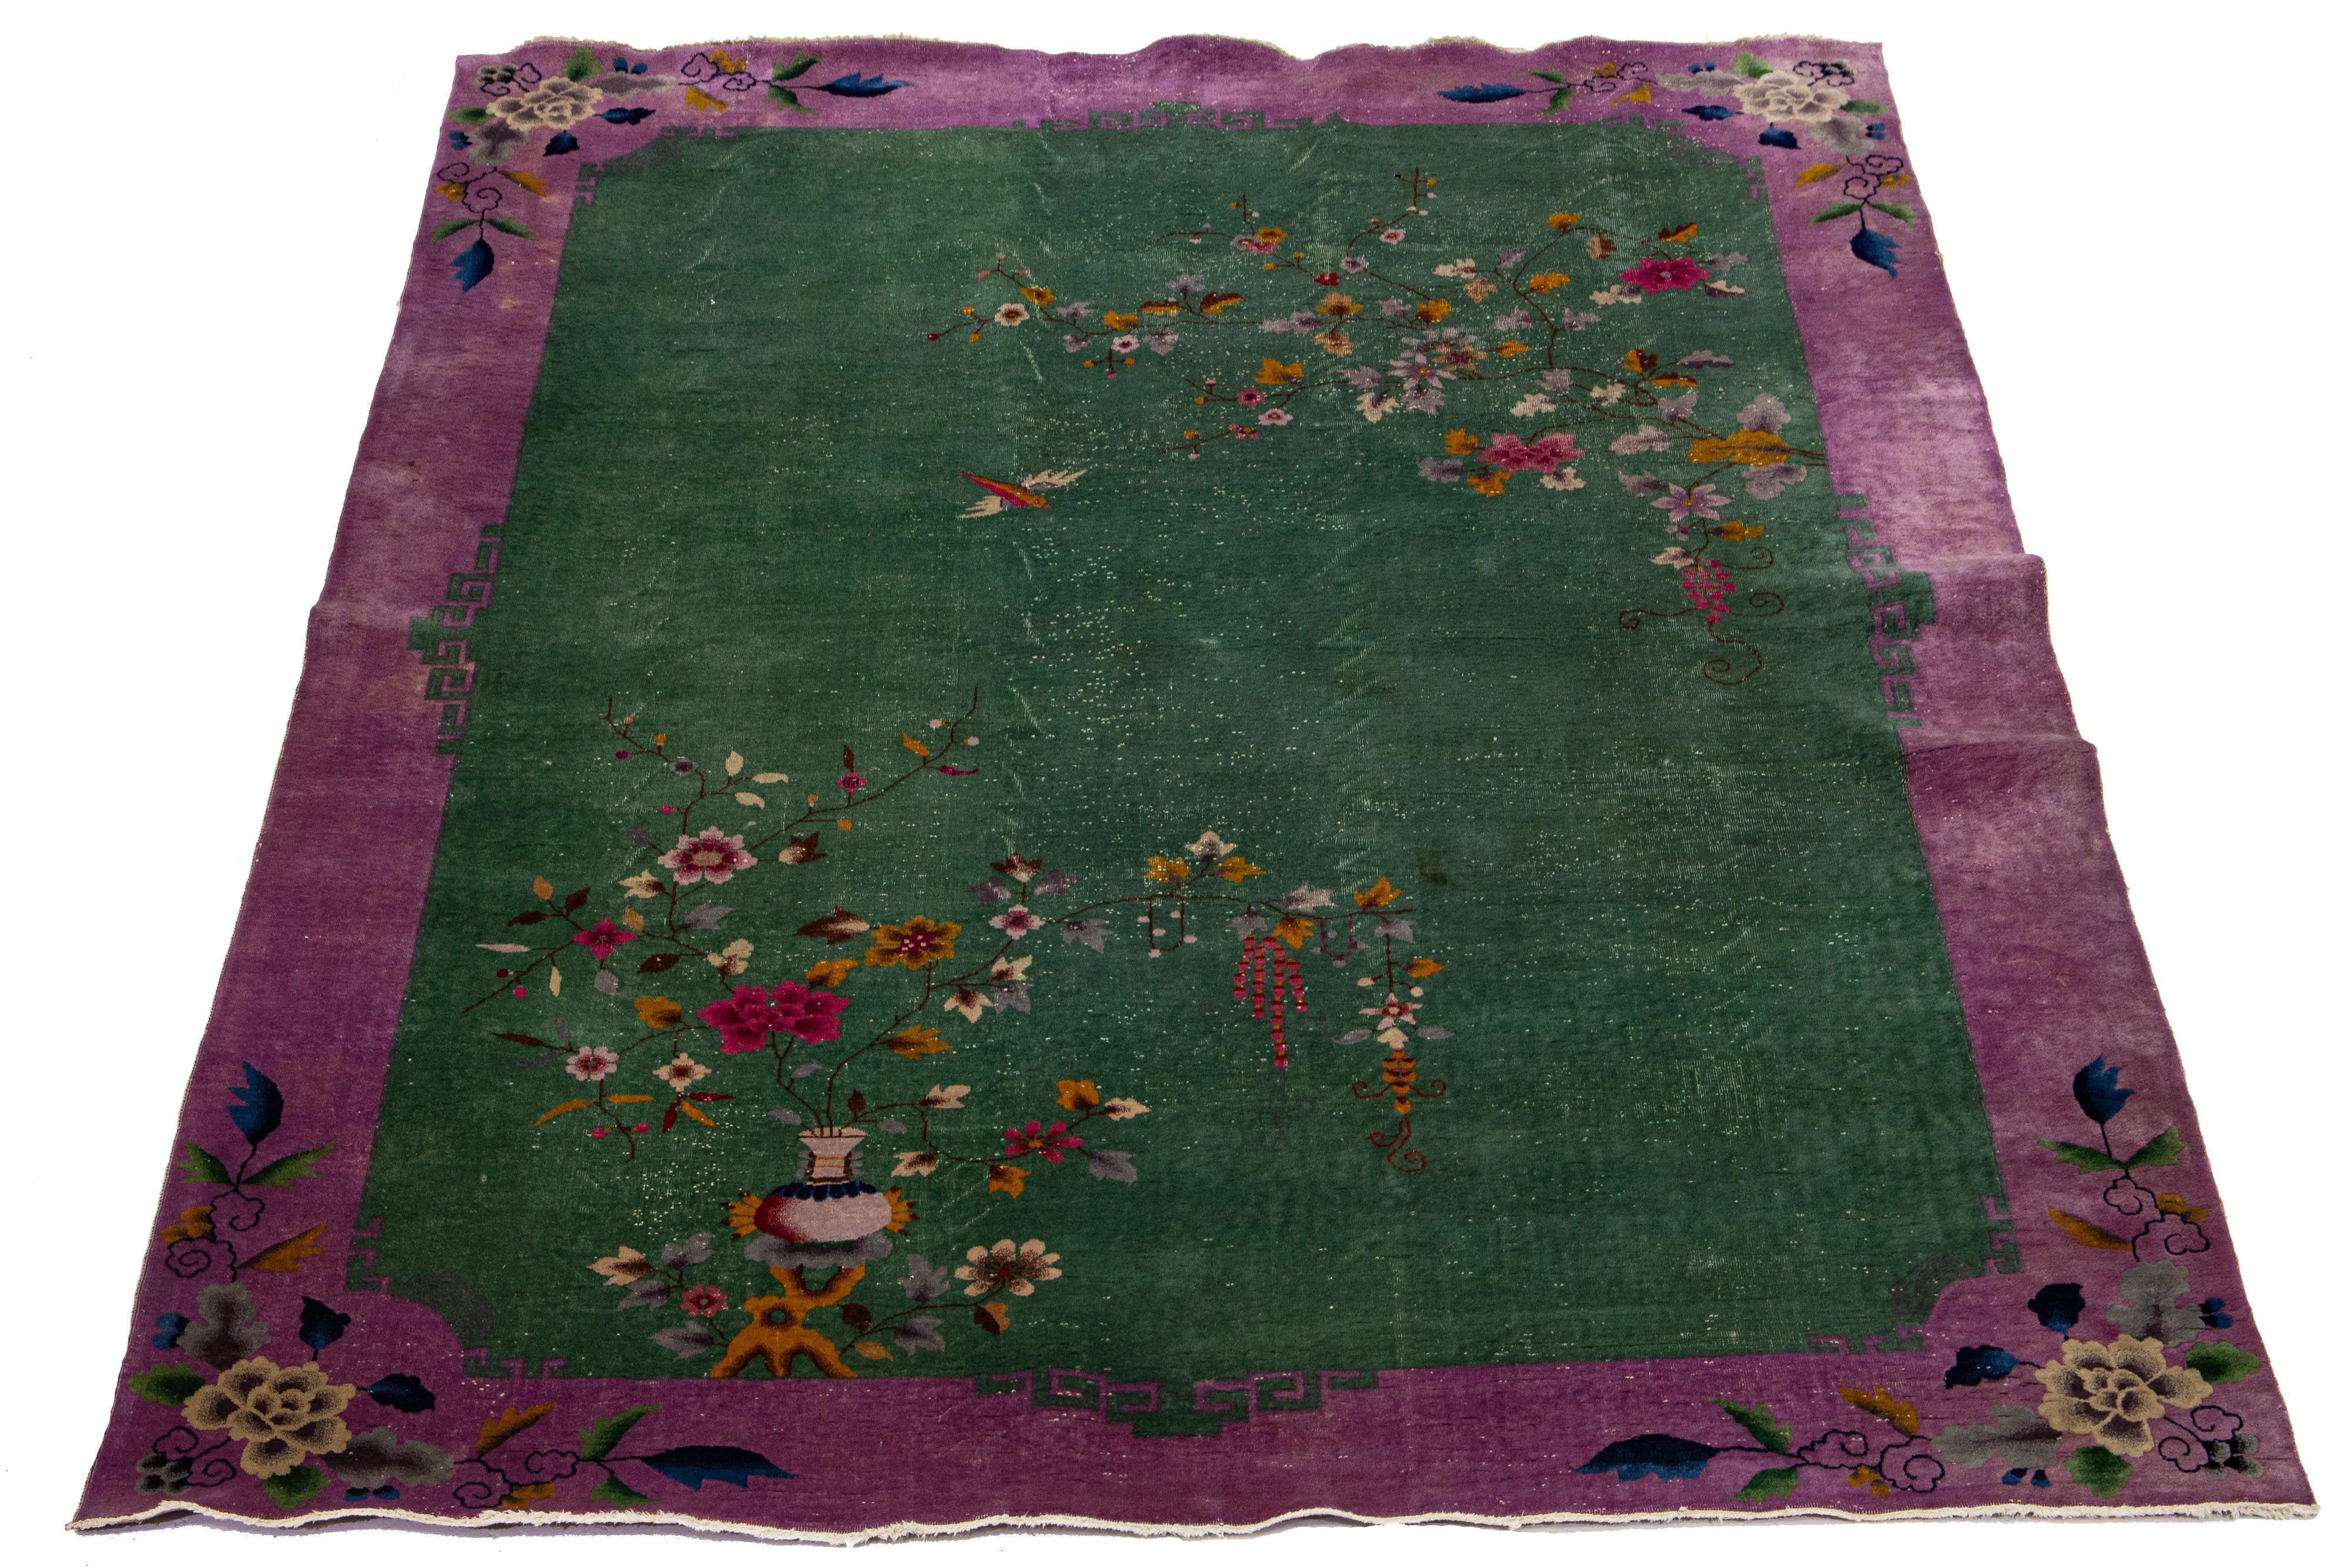 This hand-knotted antique Chinese Art Deco rug features a green field with a multicolored floral design and a purple wool frame. The elegant and sophisticated Chinese floral pattern makes it a classic.

This rug measures 9'11